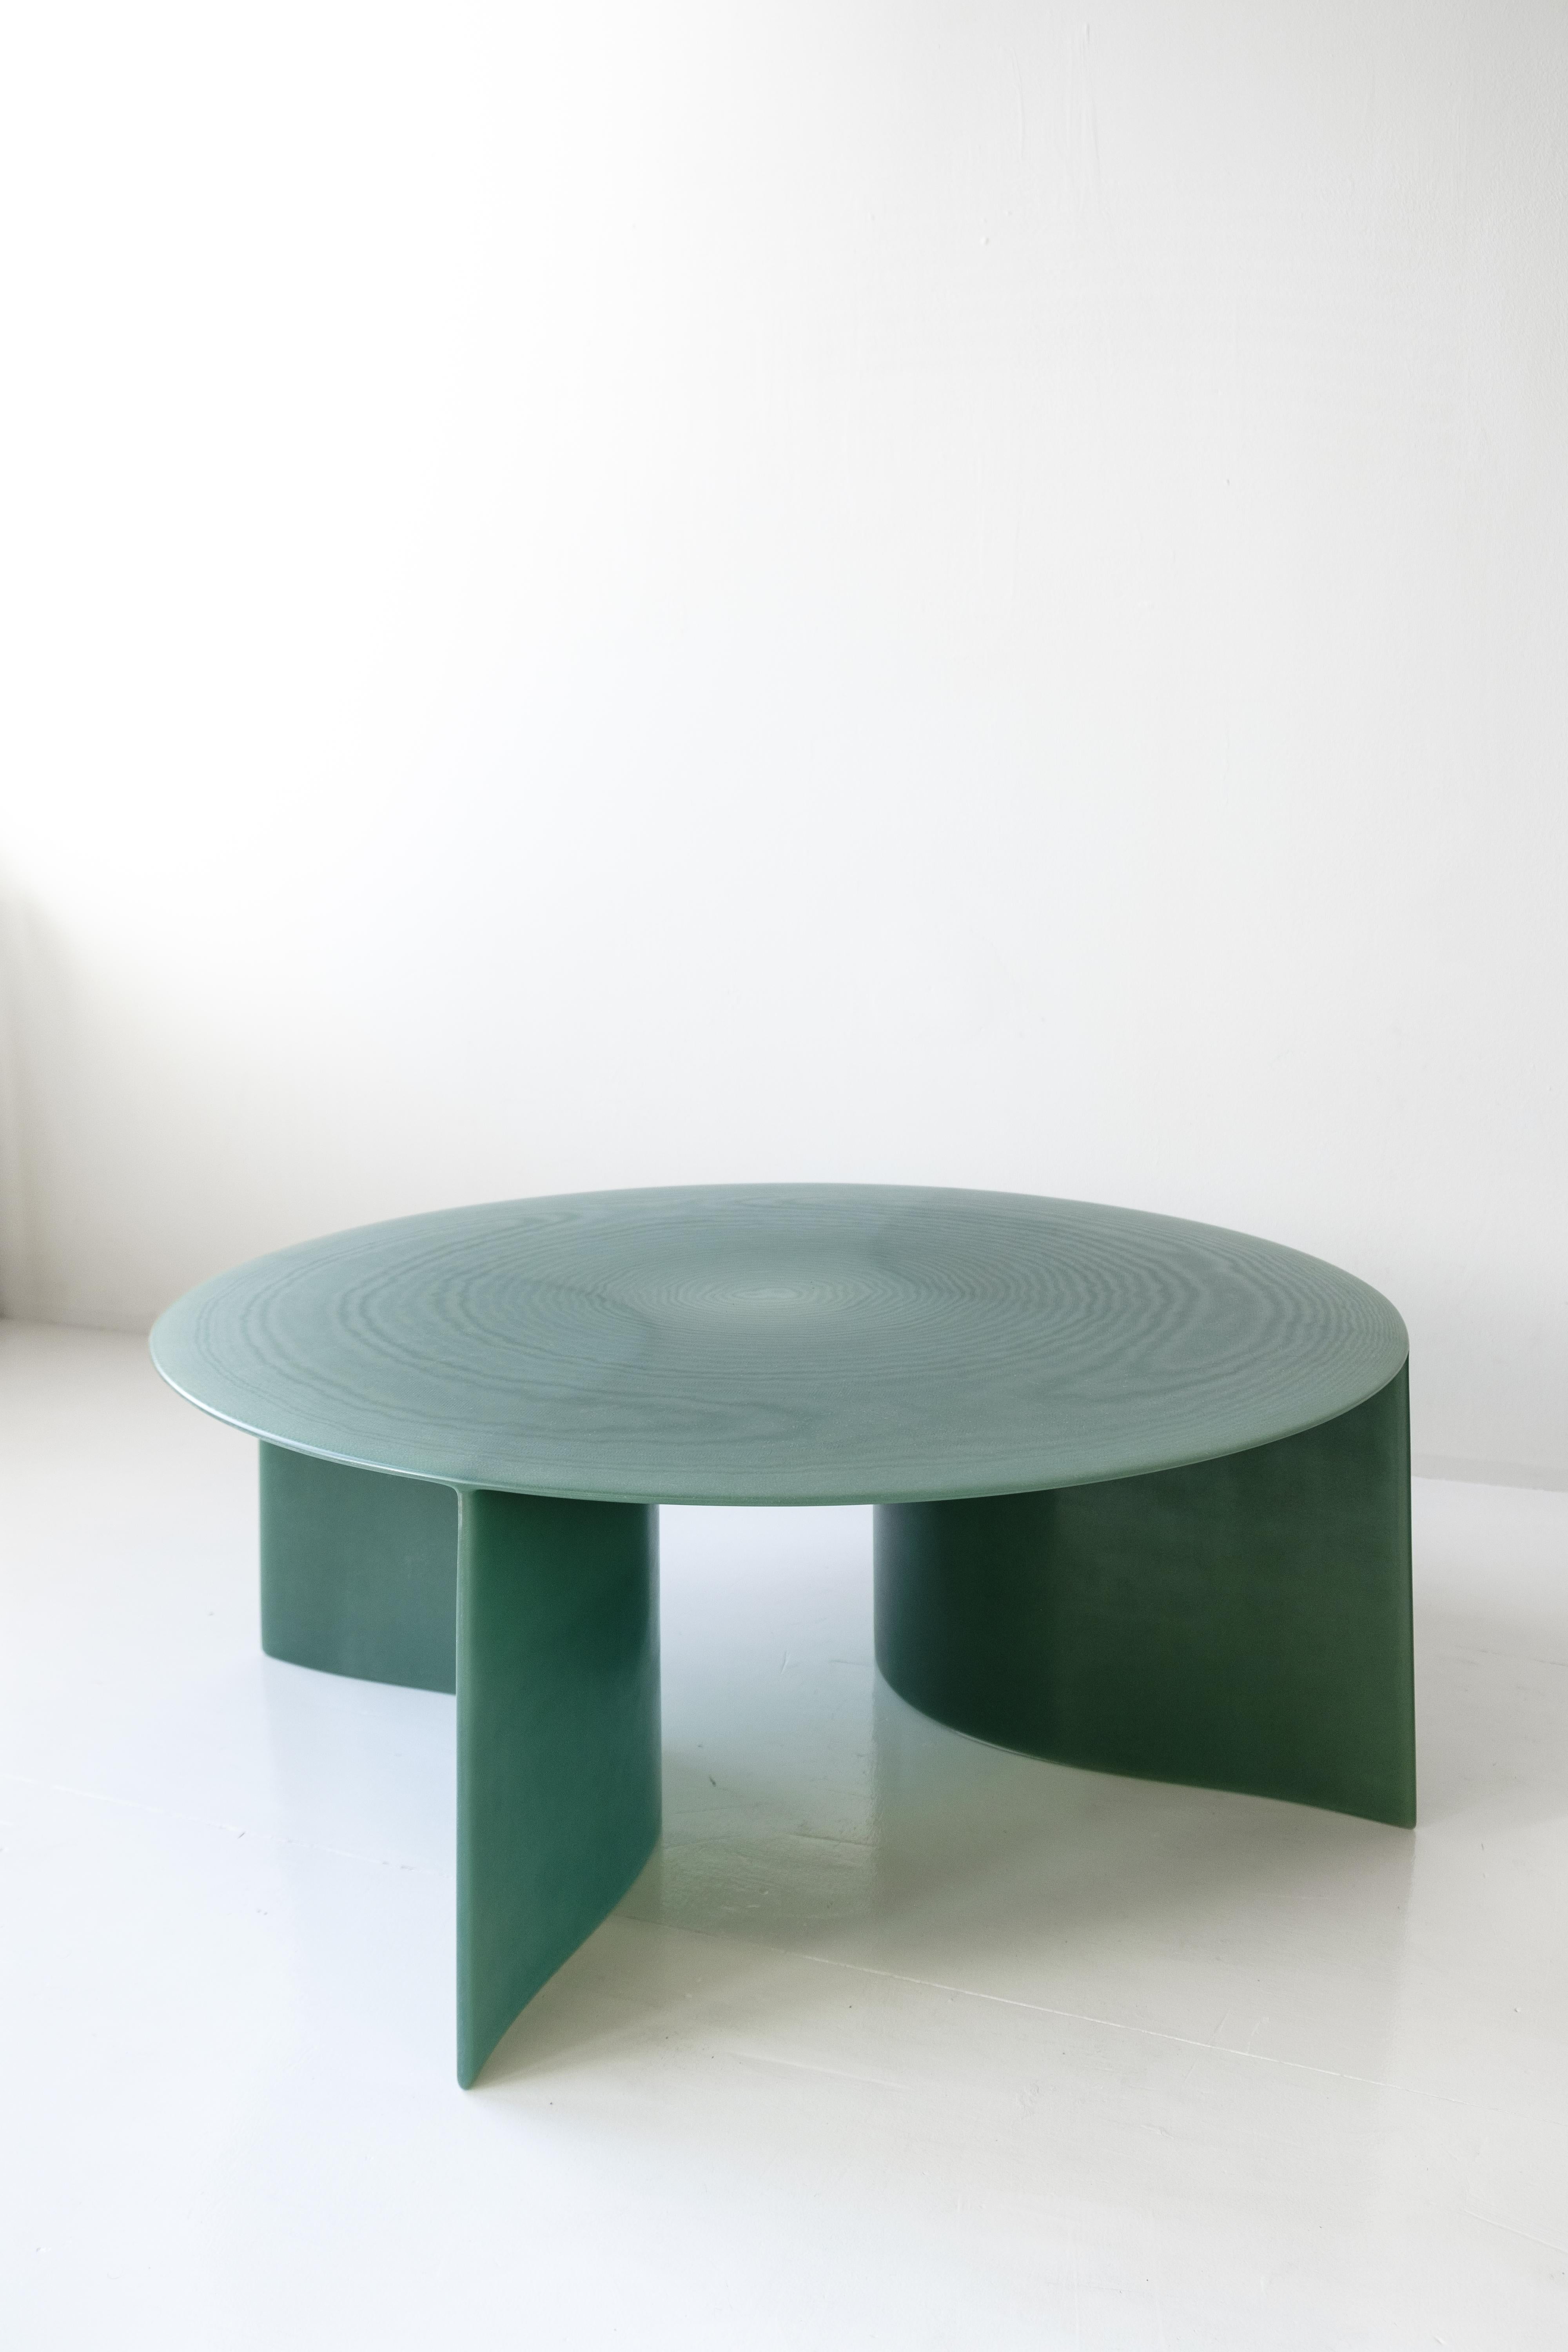 Contemporary Green Fiberglass, New Wave Coffee Table Round 120cm, by Lukas Cober For Sale 7